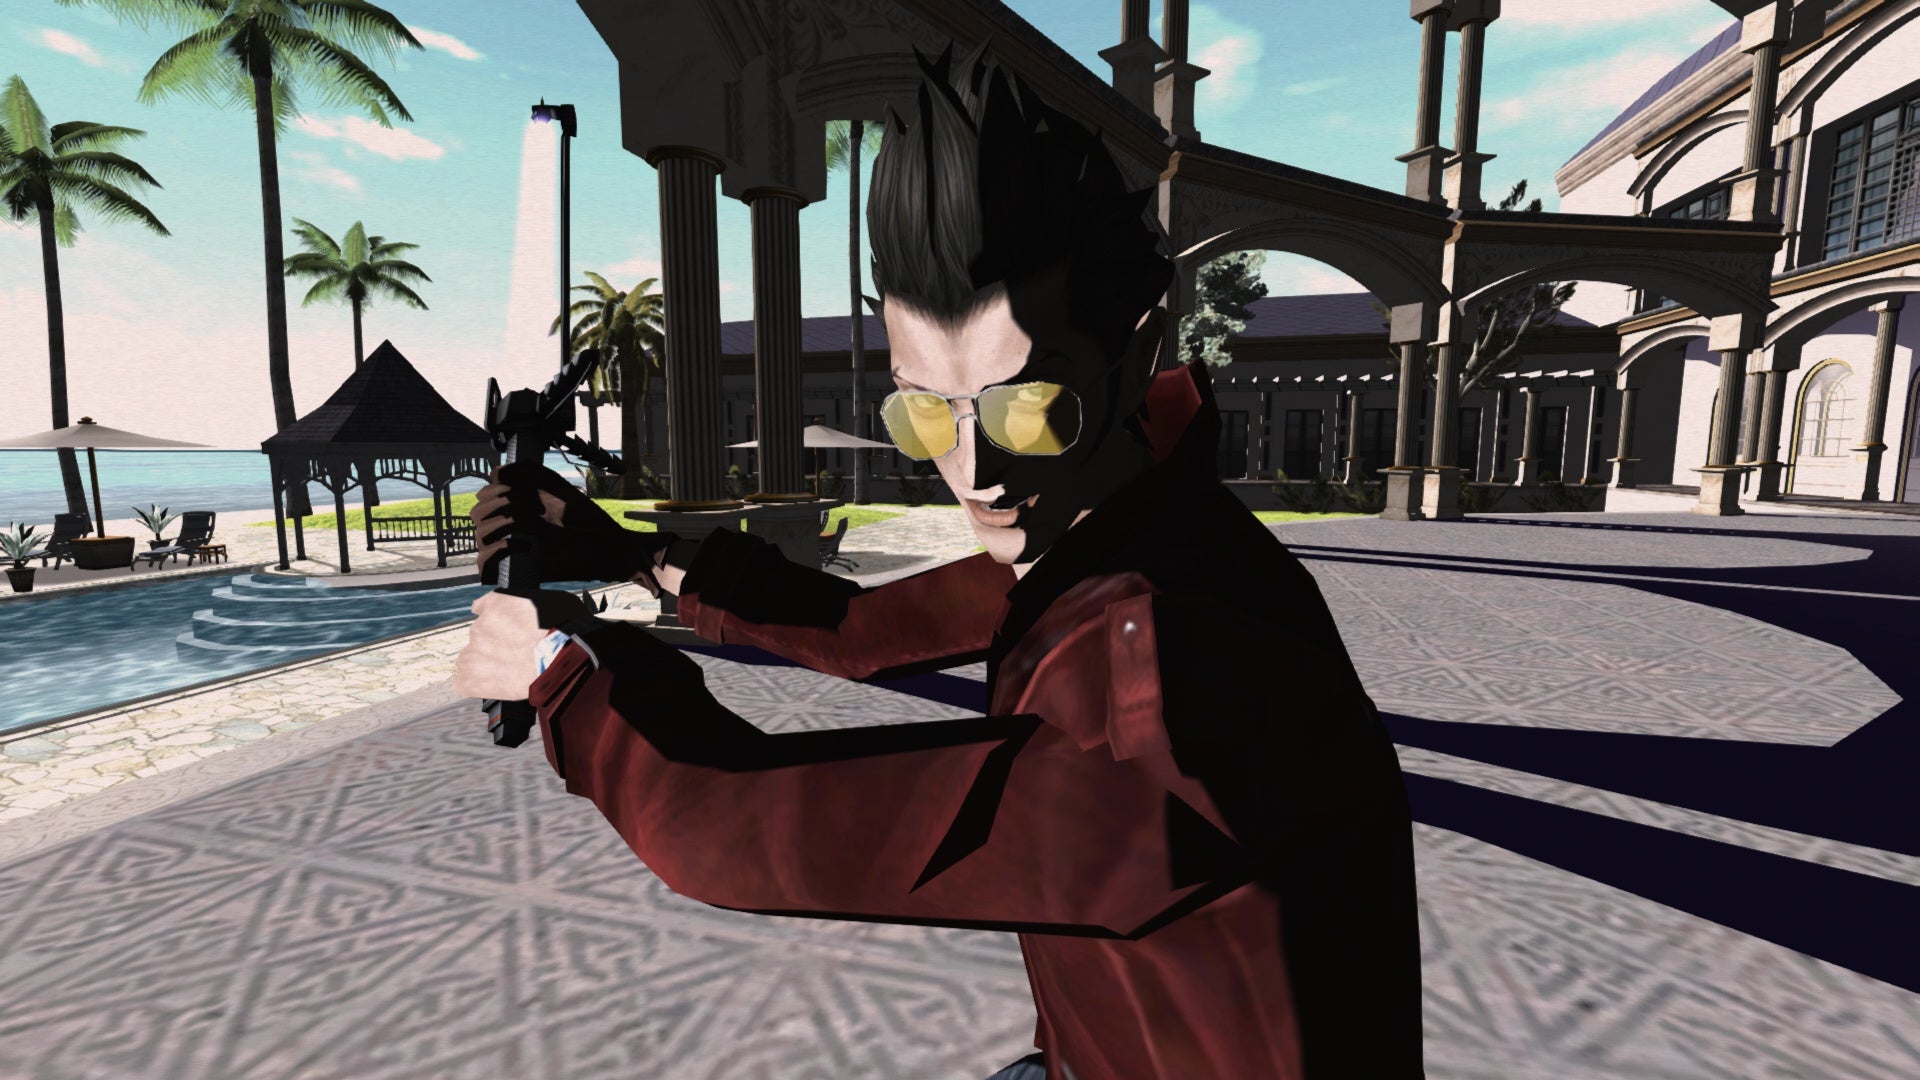 A screenshot from No More Heroes which shows Travis Touchdown raise his beam katana with both hands, ready for a fight.